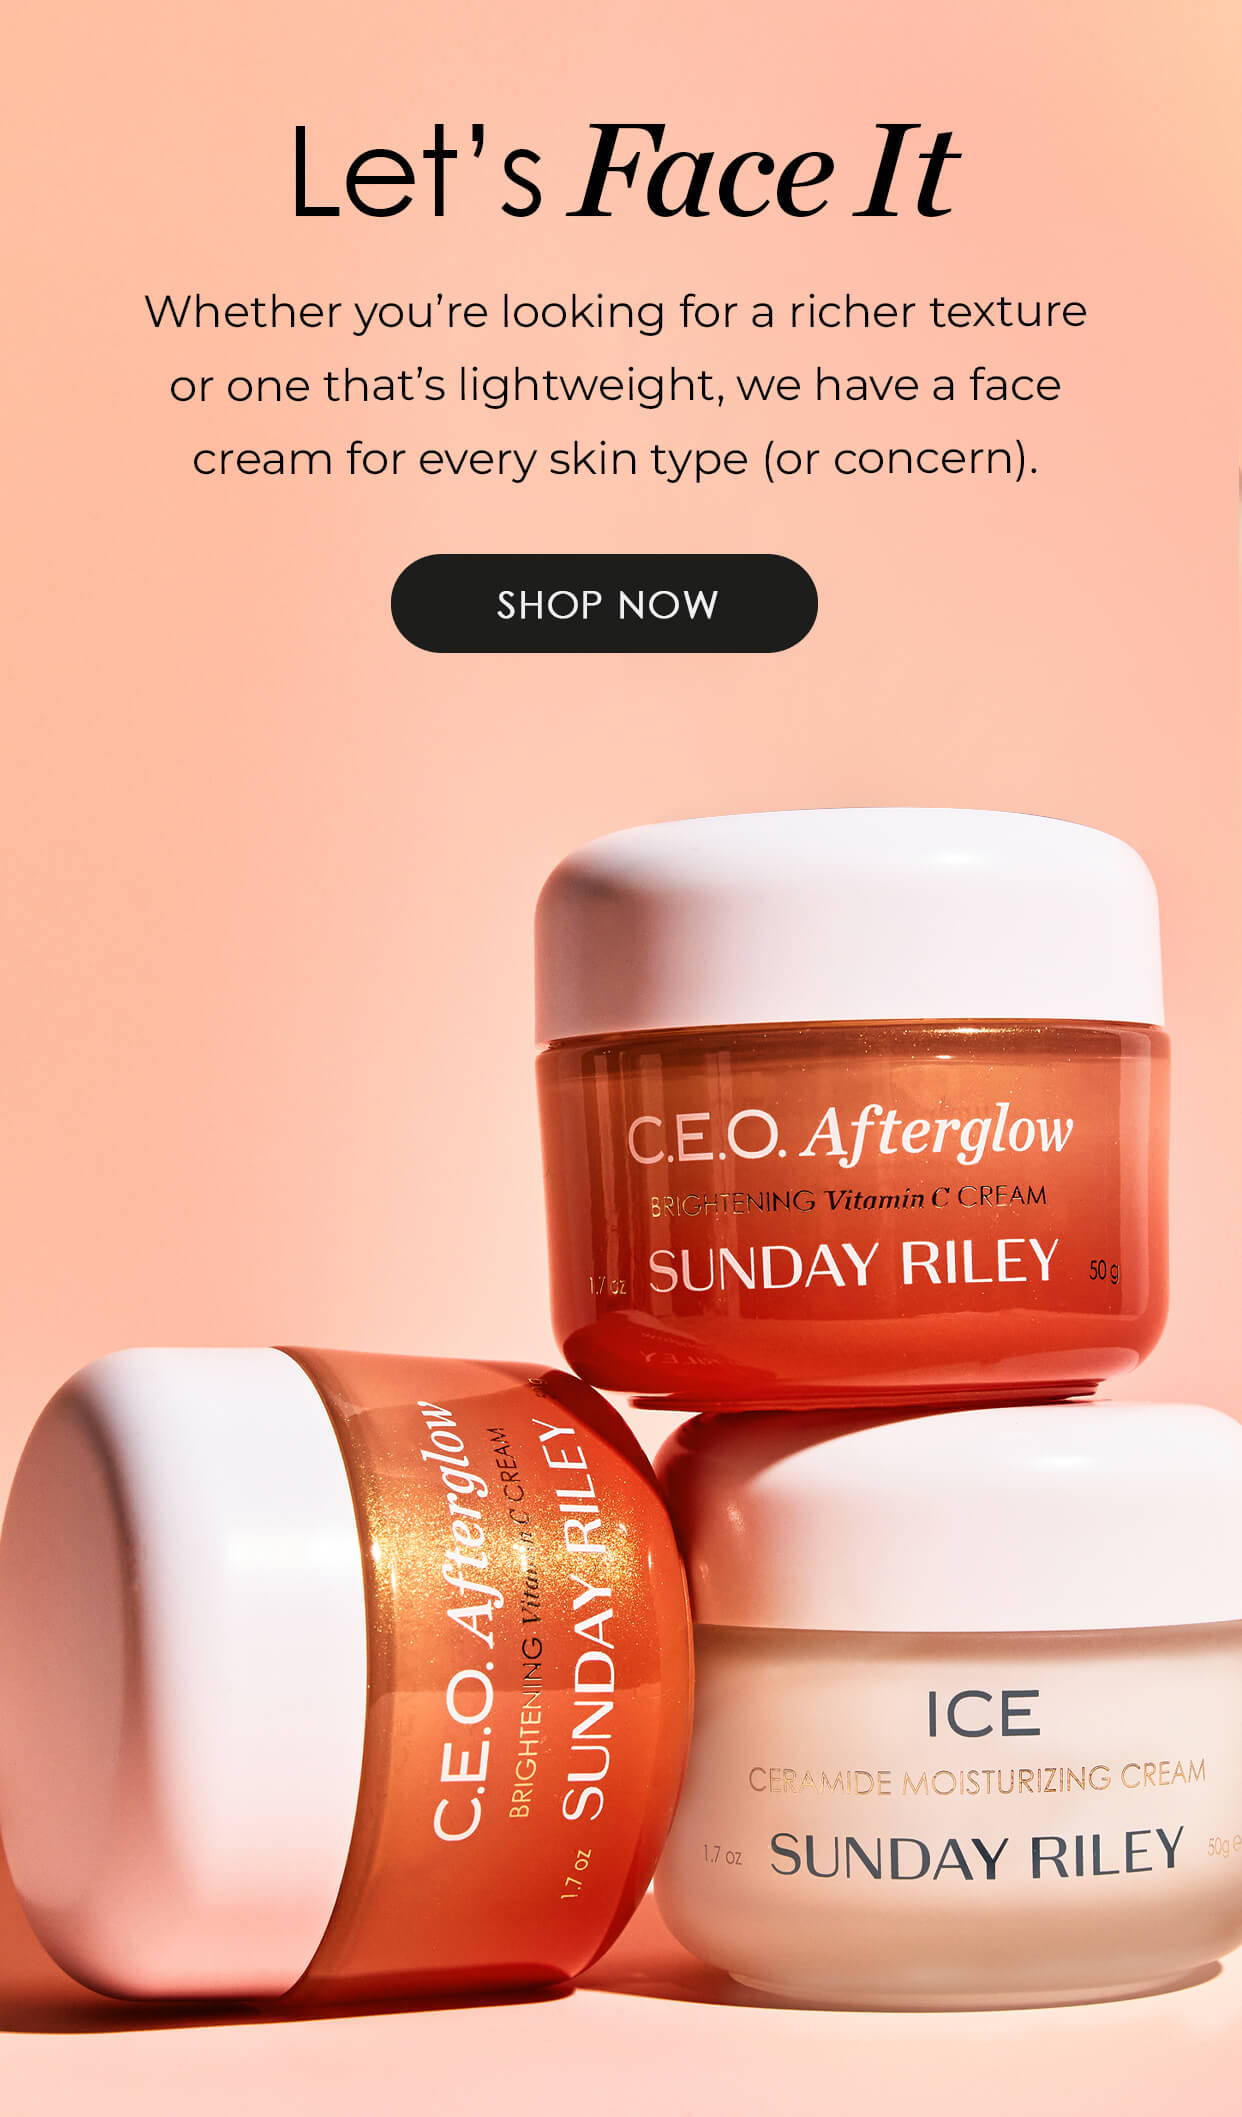 background image displaying C.E.O. Afterglow and ICE Ceramide Moisturizing Cream with text overlay "Let's Face It - Whether you're looking for a richer texture or one that's light weight, we have a face cream for every skin type (or concern)." and button "SHOP NOW"